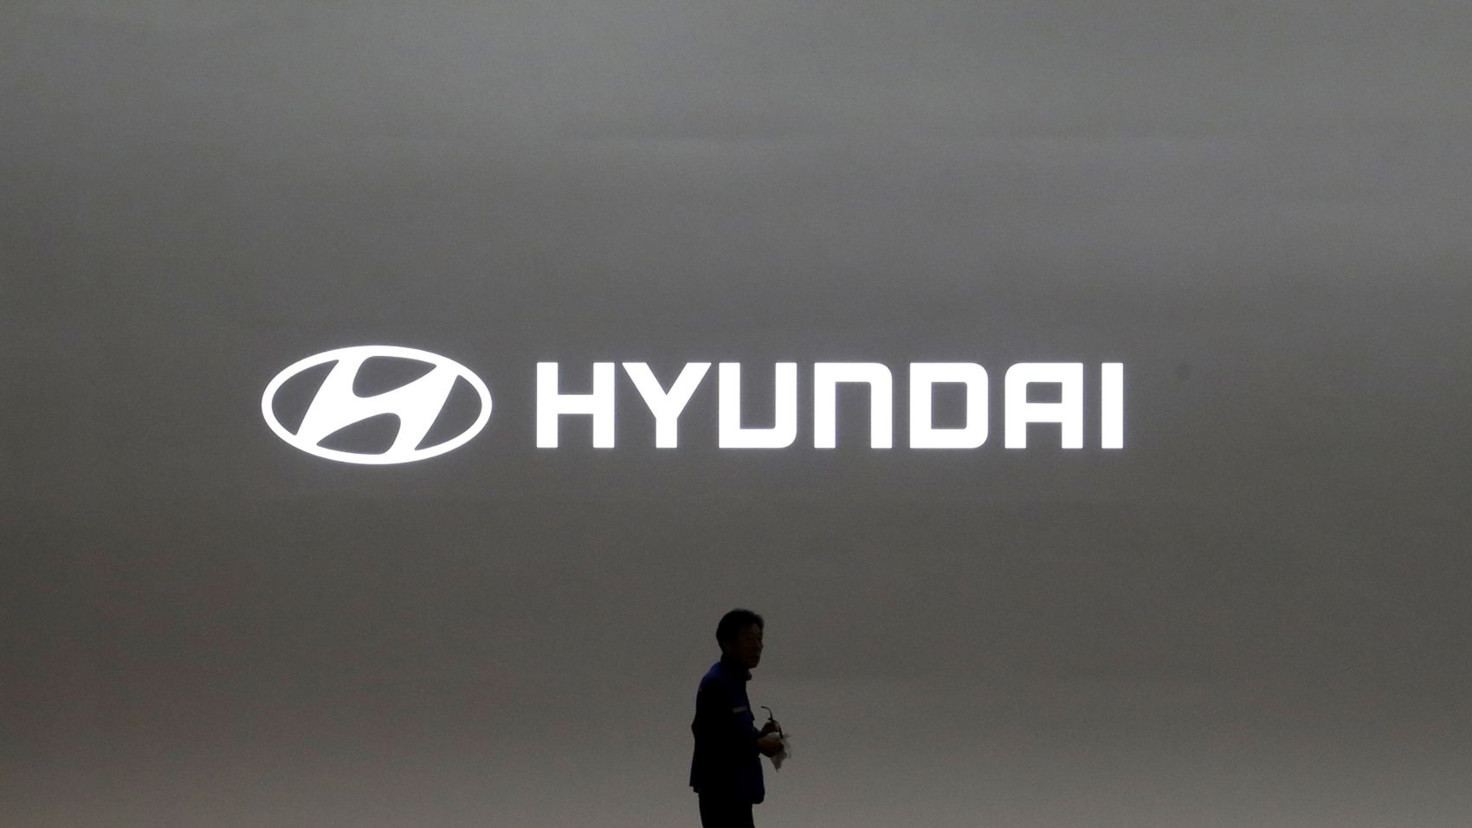 Hyundai profits rise, but lower than expected